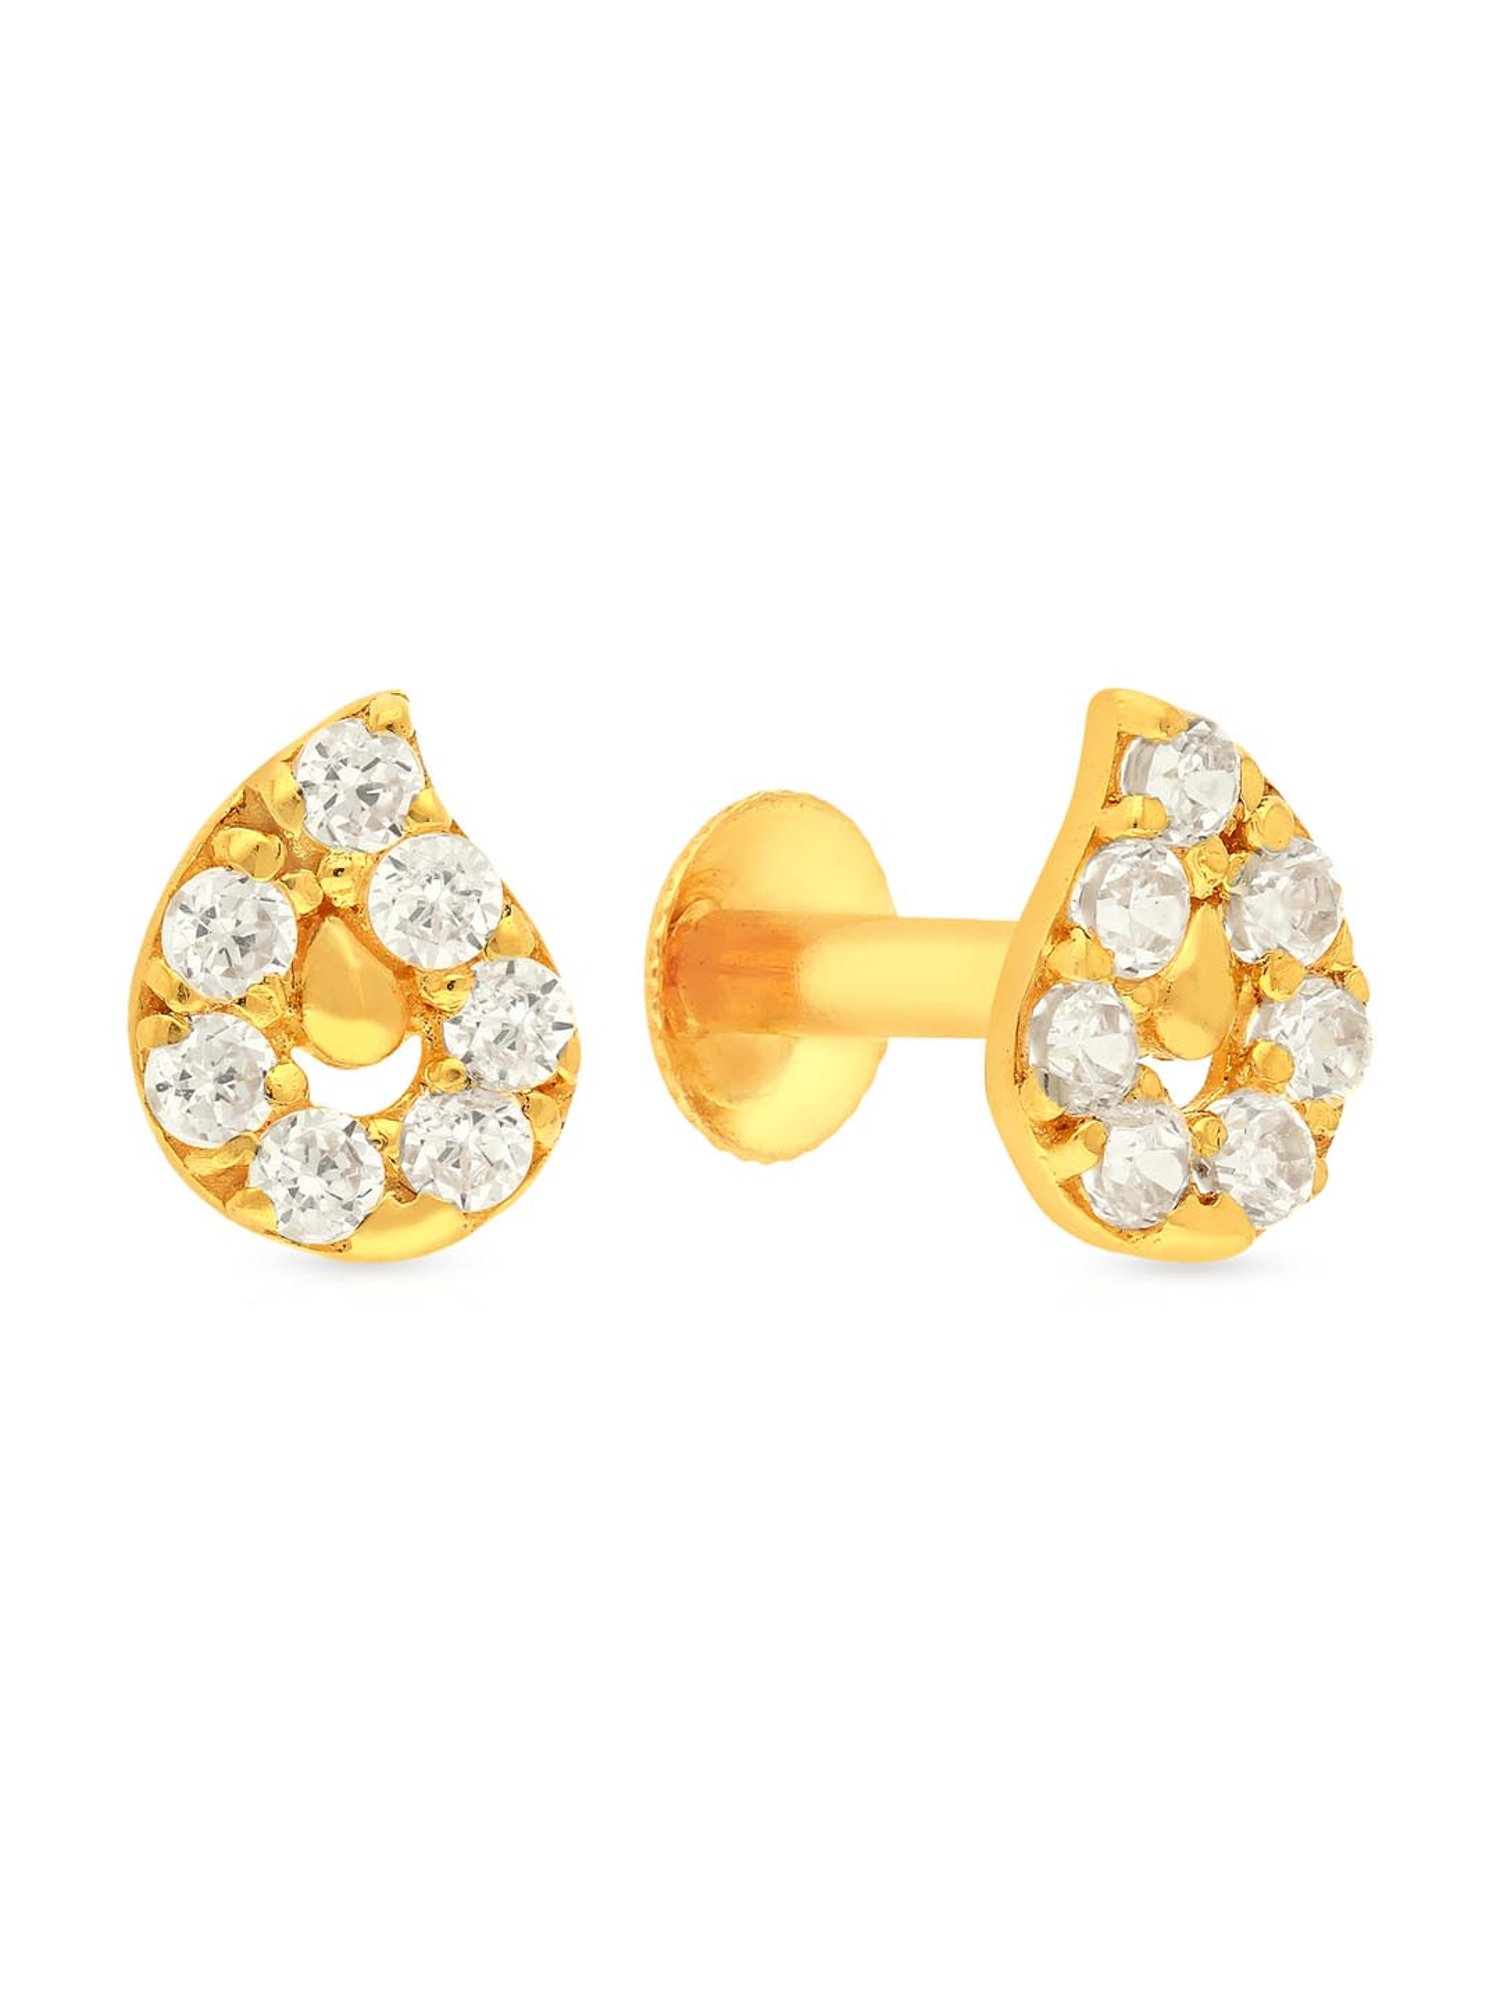 Buy Malabar Gold and Diamonds 22k Gold Earrings for Women Online At Best  Price  Tata CLiQ